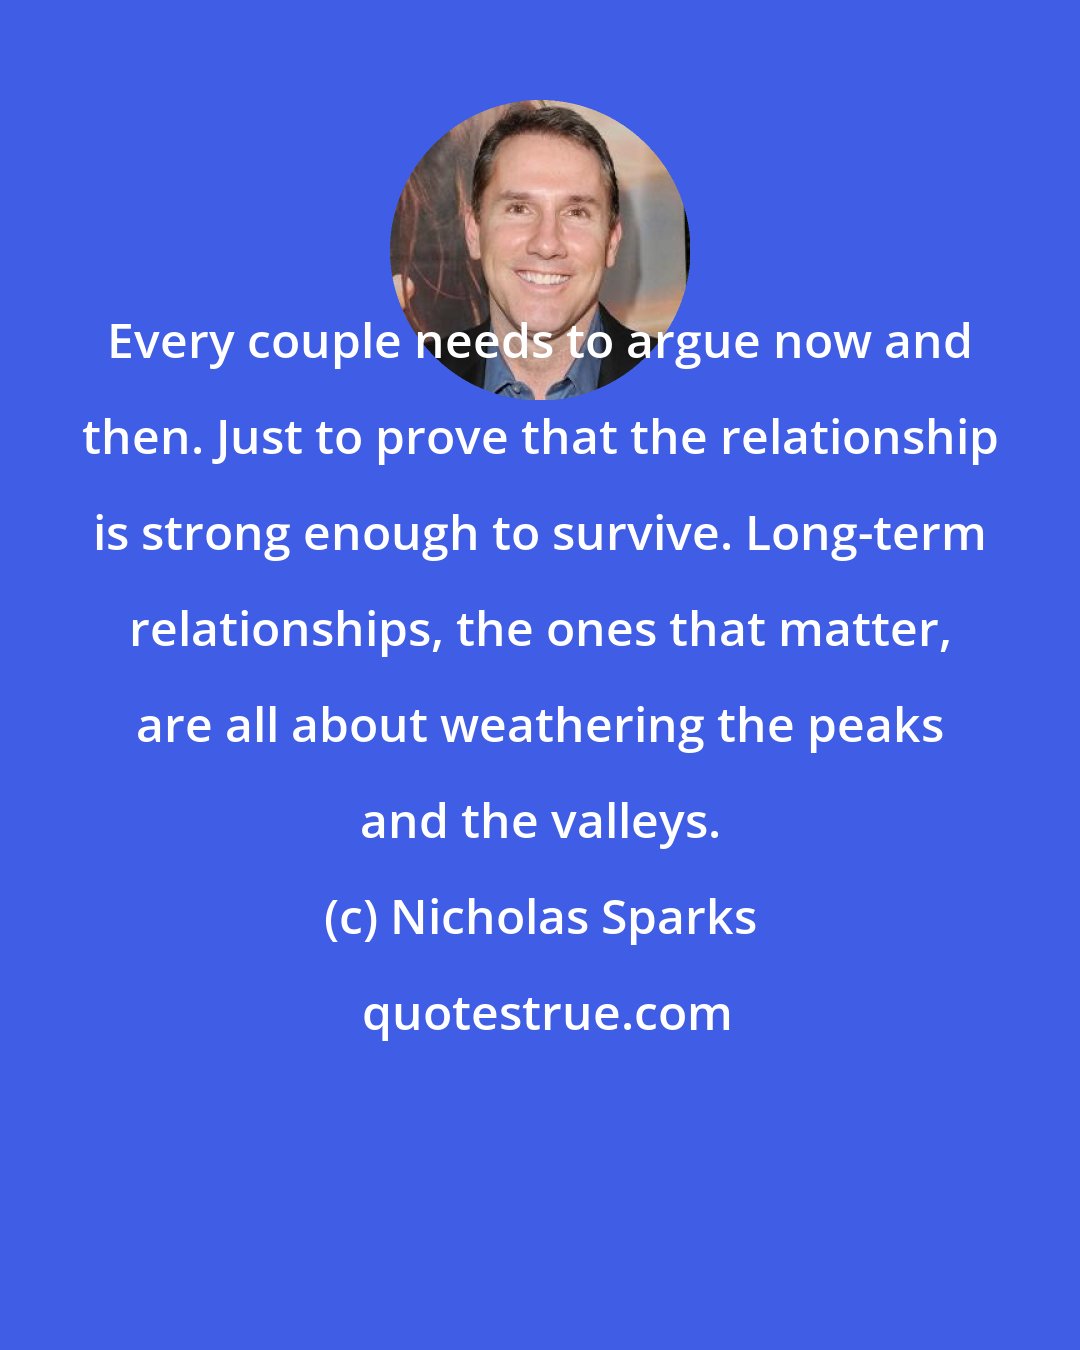 Nicholas Sparks: Every couple needs to argue now and then. Just to prove that the relationship is strong enough to survive. Long-term relationships, the ones that matter, are all about weathering the peaks and the valleys.